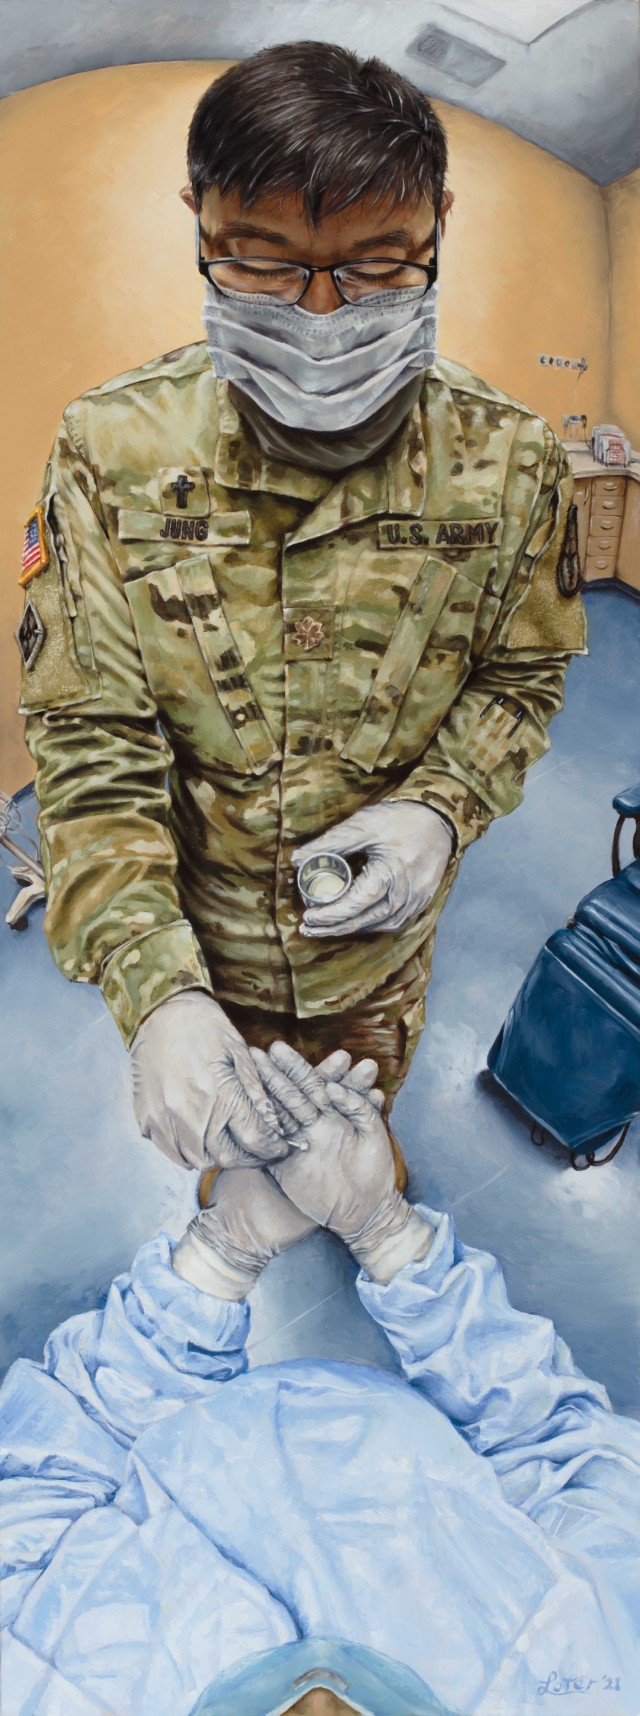 Painting titled “Blessing of the Hands” by Sgt. 1st Class Curt Loter
Oil on Canvas, 2021. Army Chaplain Jung blesses the hands of an Army Nurse with oil during National Nurses week in 2020.
